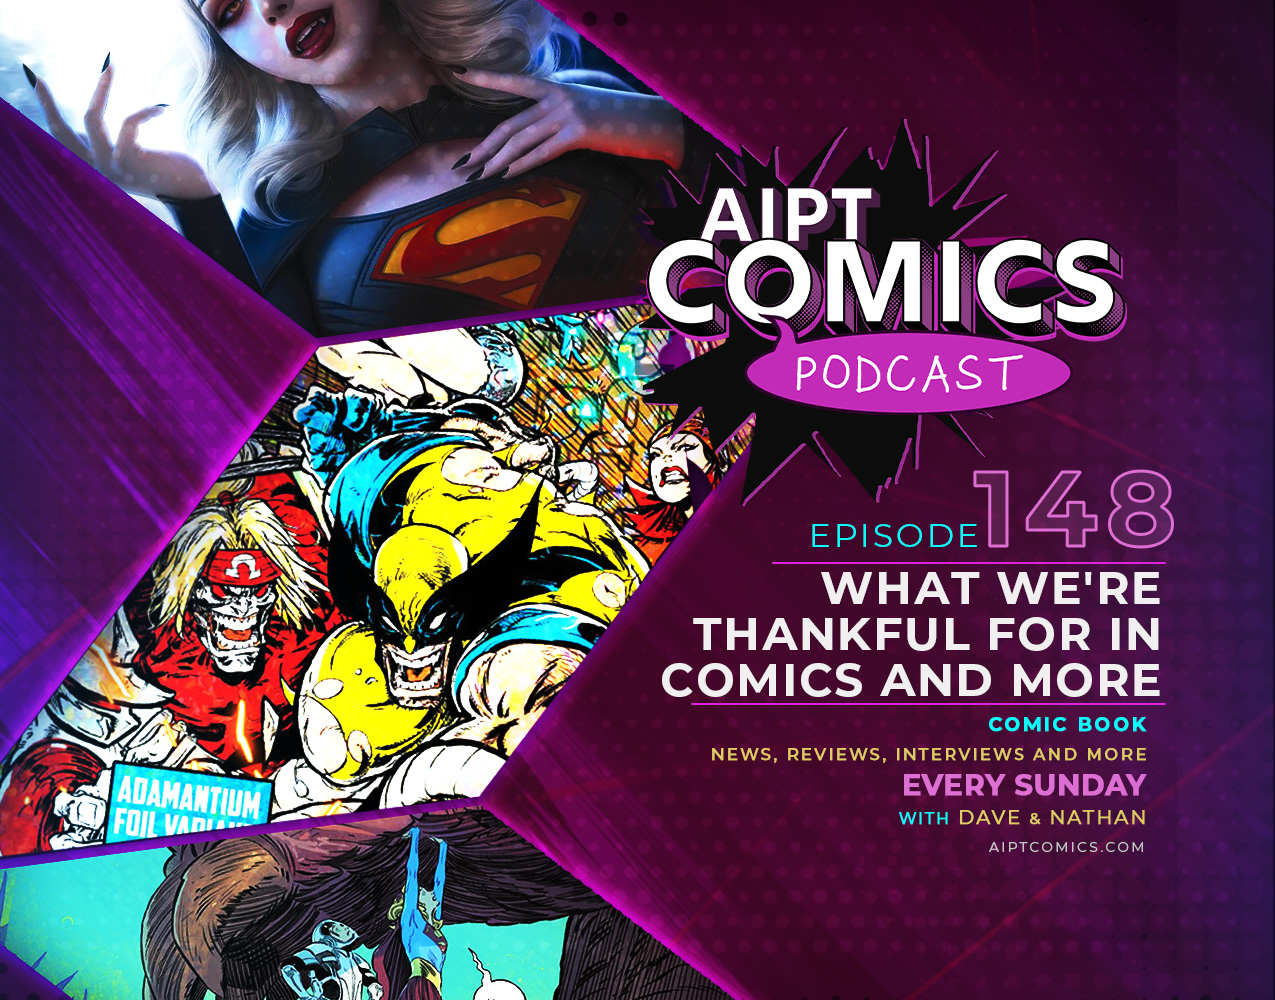 AIPT Comics Podcast episode 148: What we're thankful for in comics and more